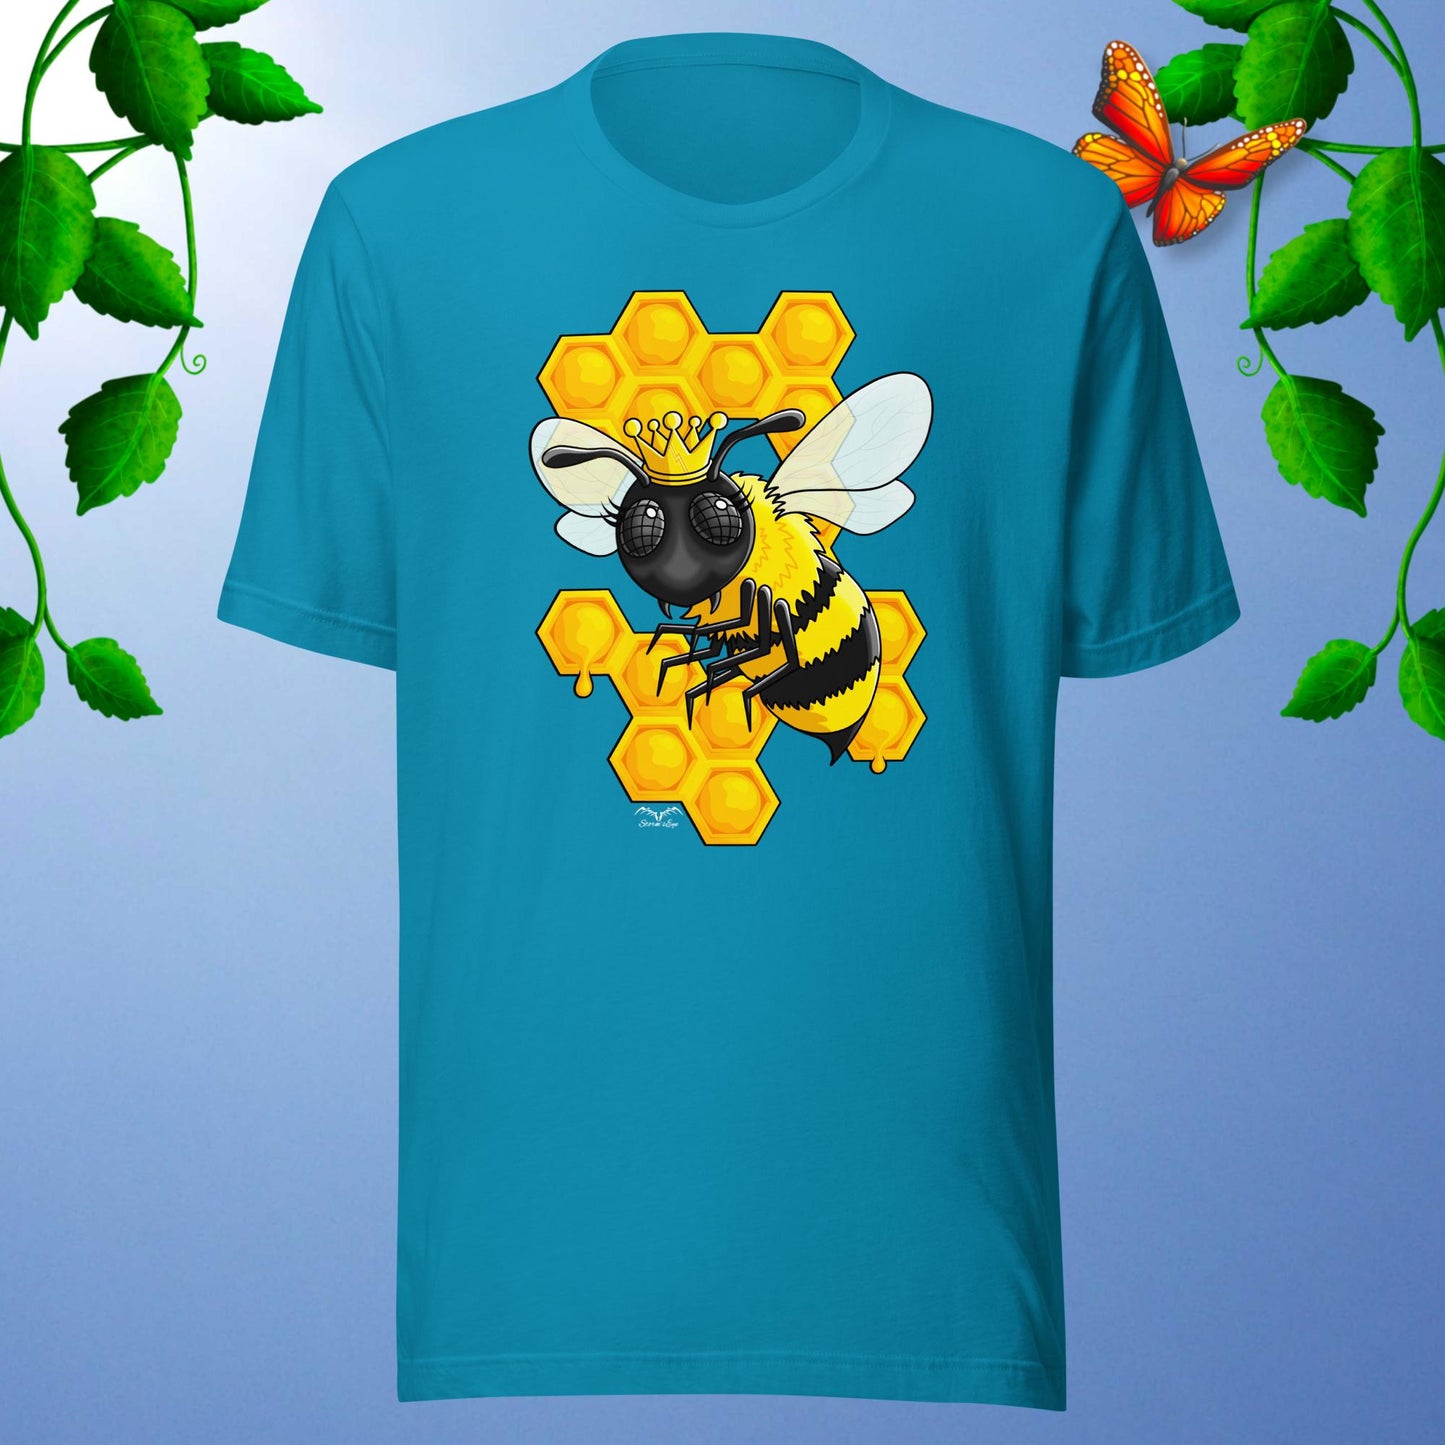 queen bee t-shirt bright blue by stormseye design